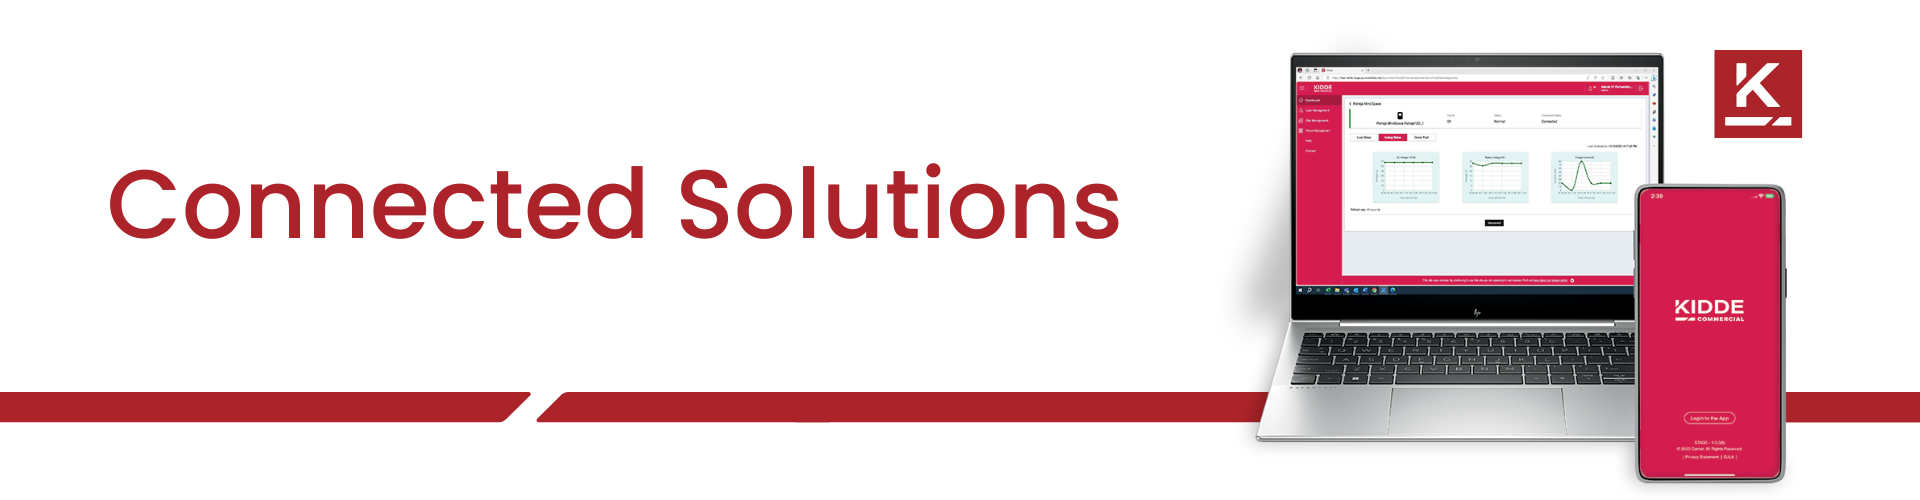 Connected Solutions